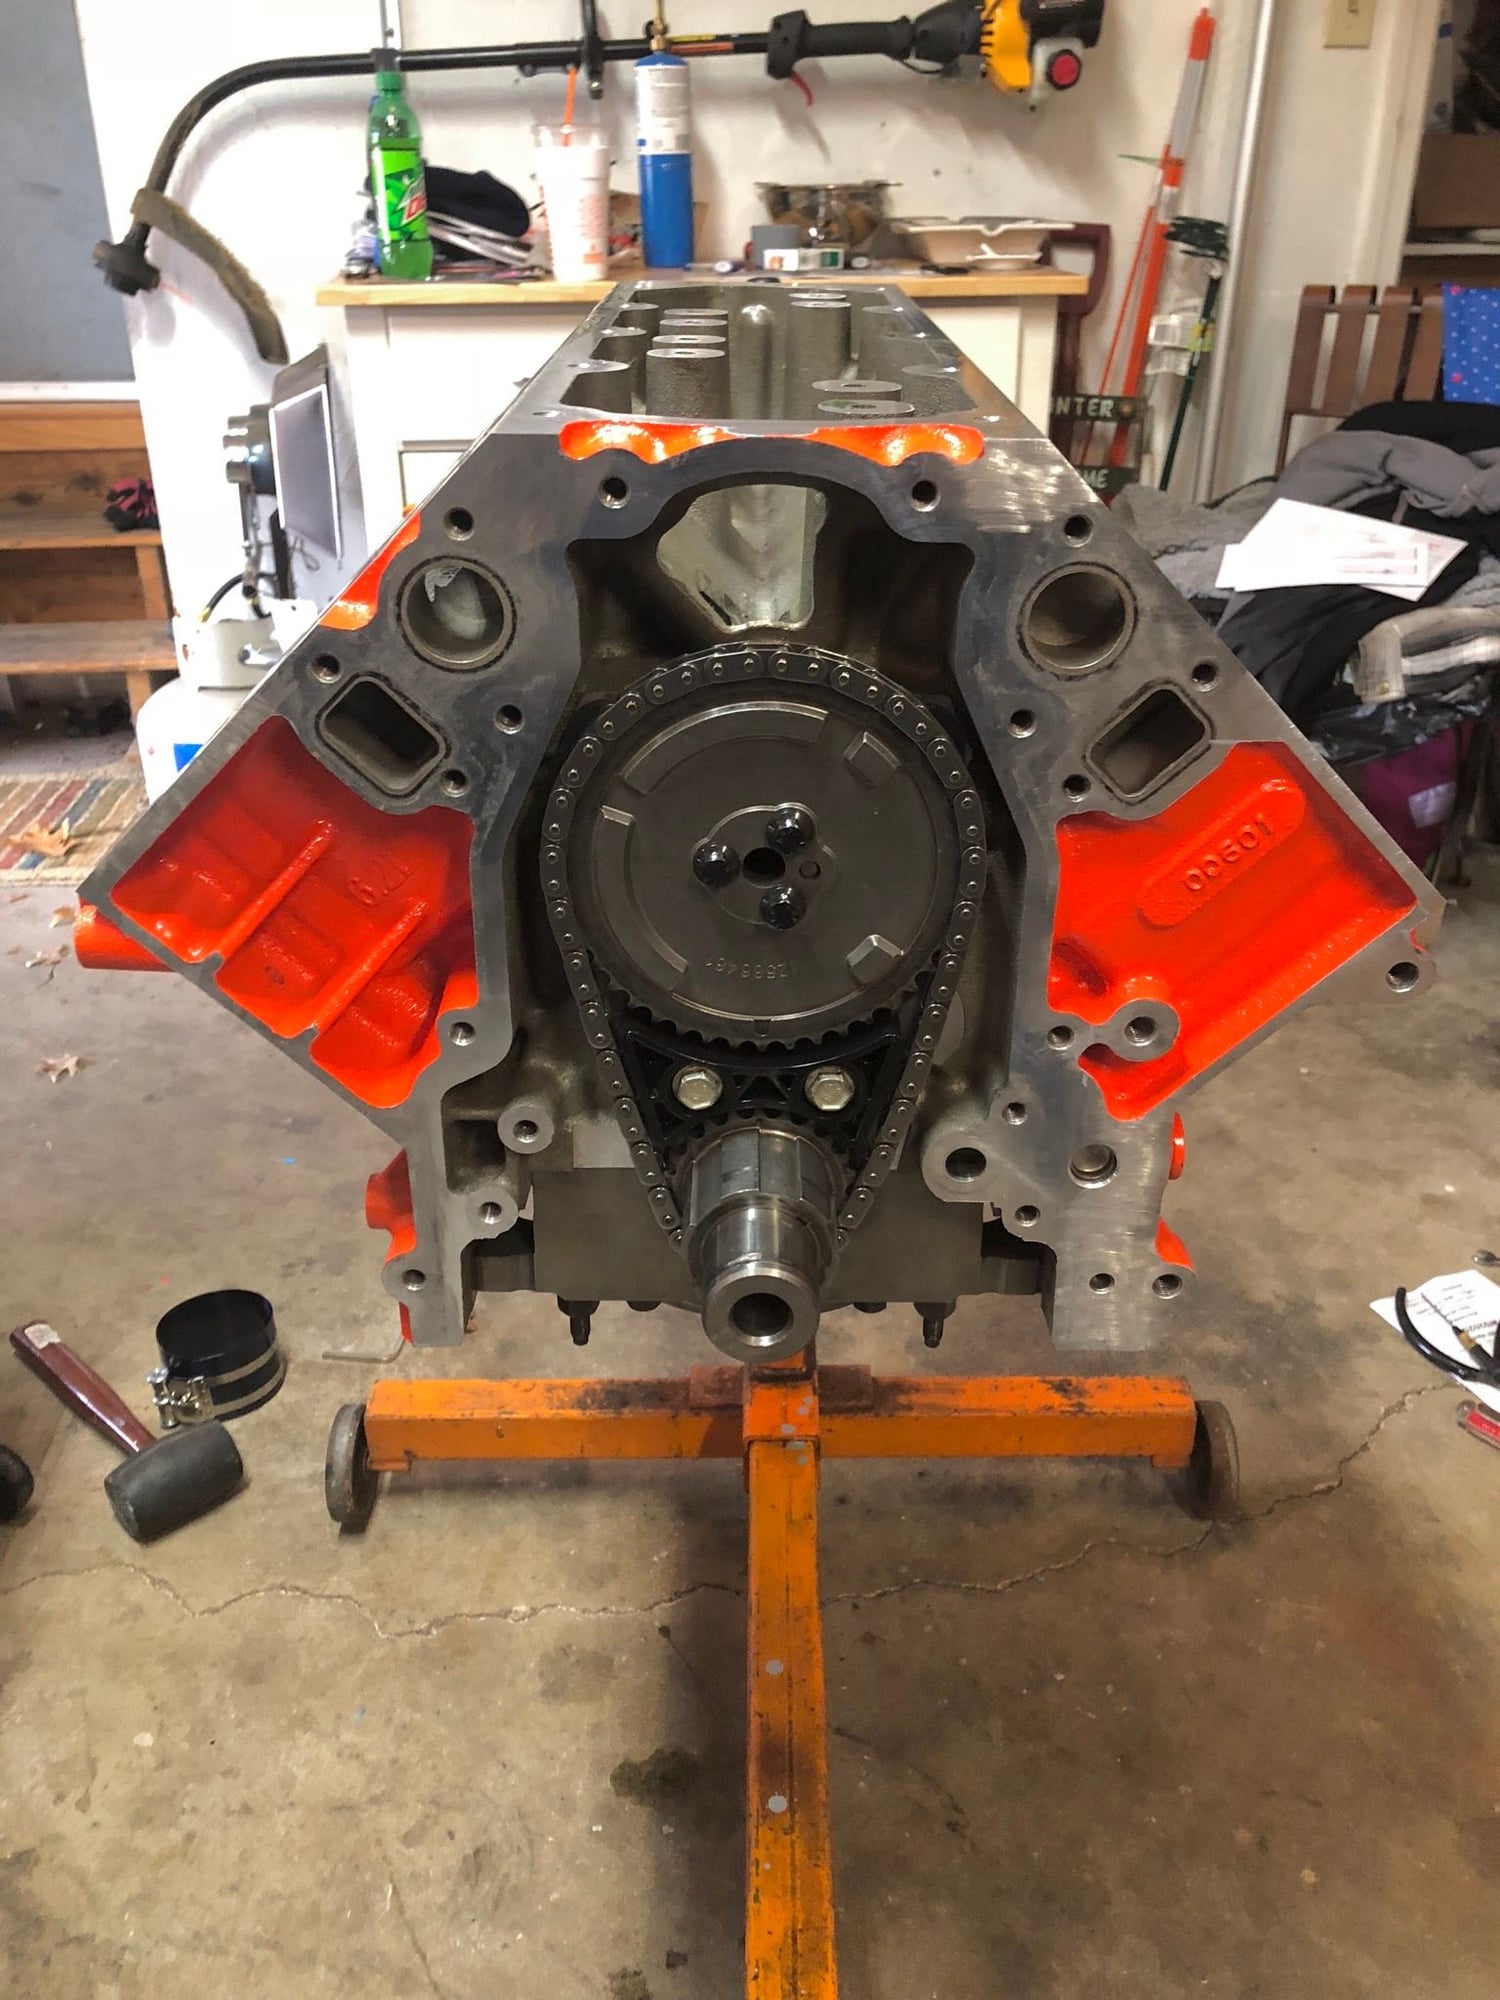  - Fresh Complete LS3 Motor - Ready to go with lots of goodies - Bridgewater, MA 02324, United States